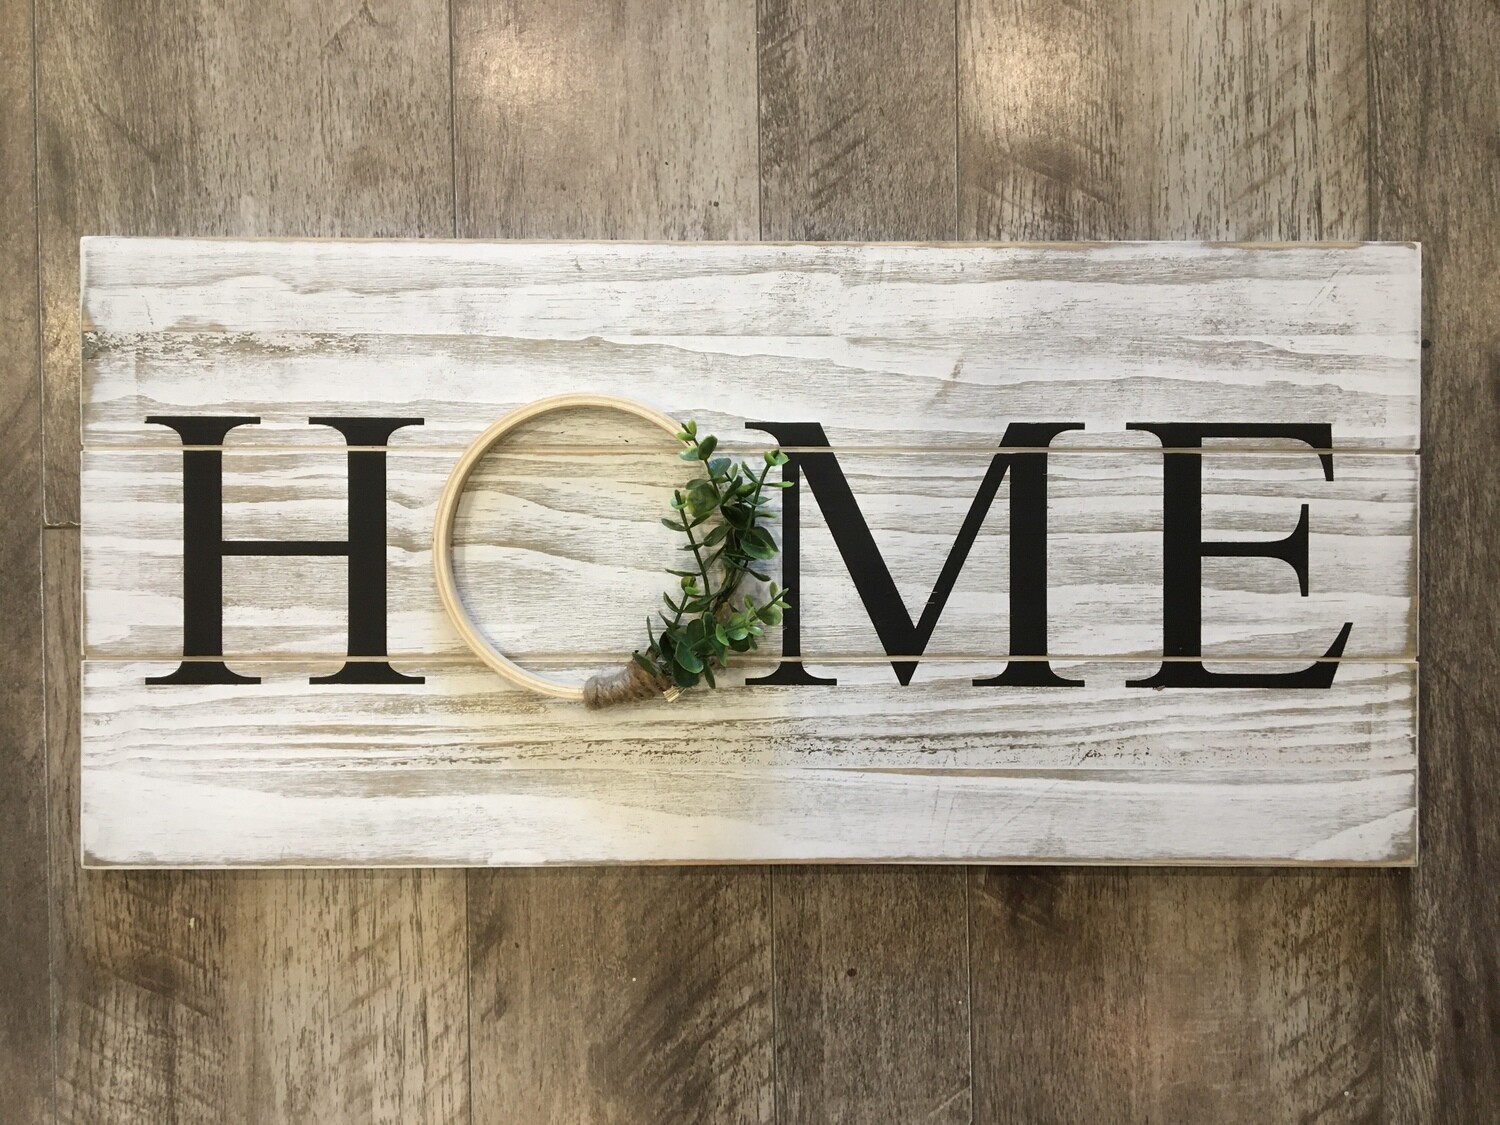 Home with wreath